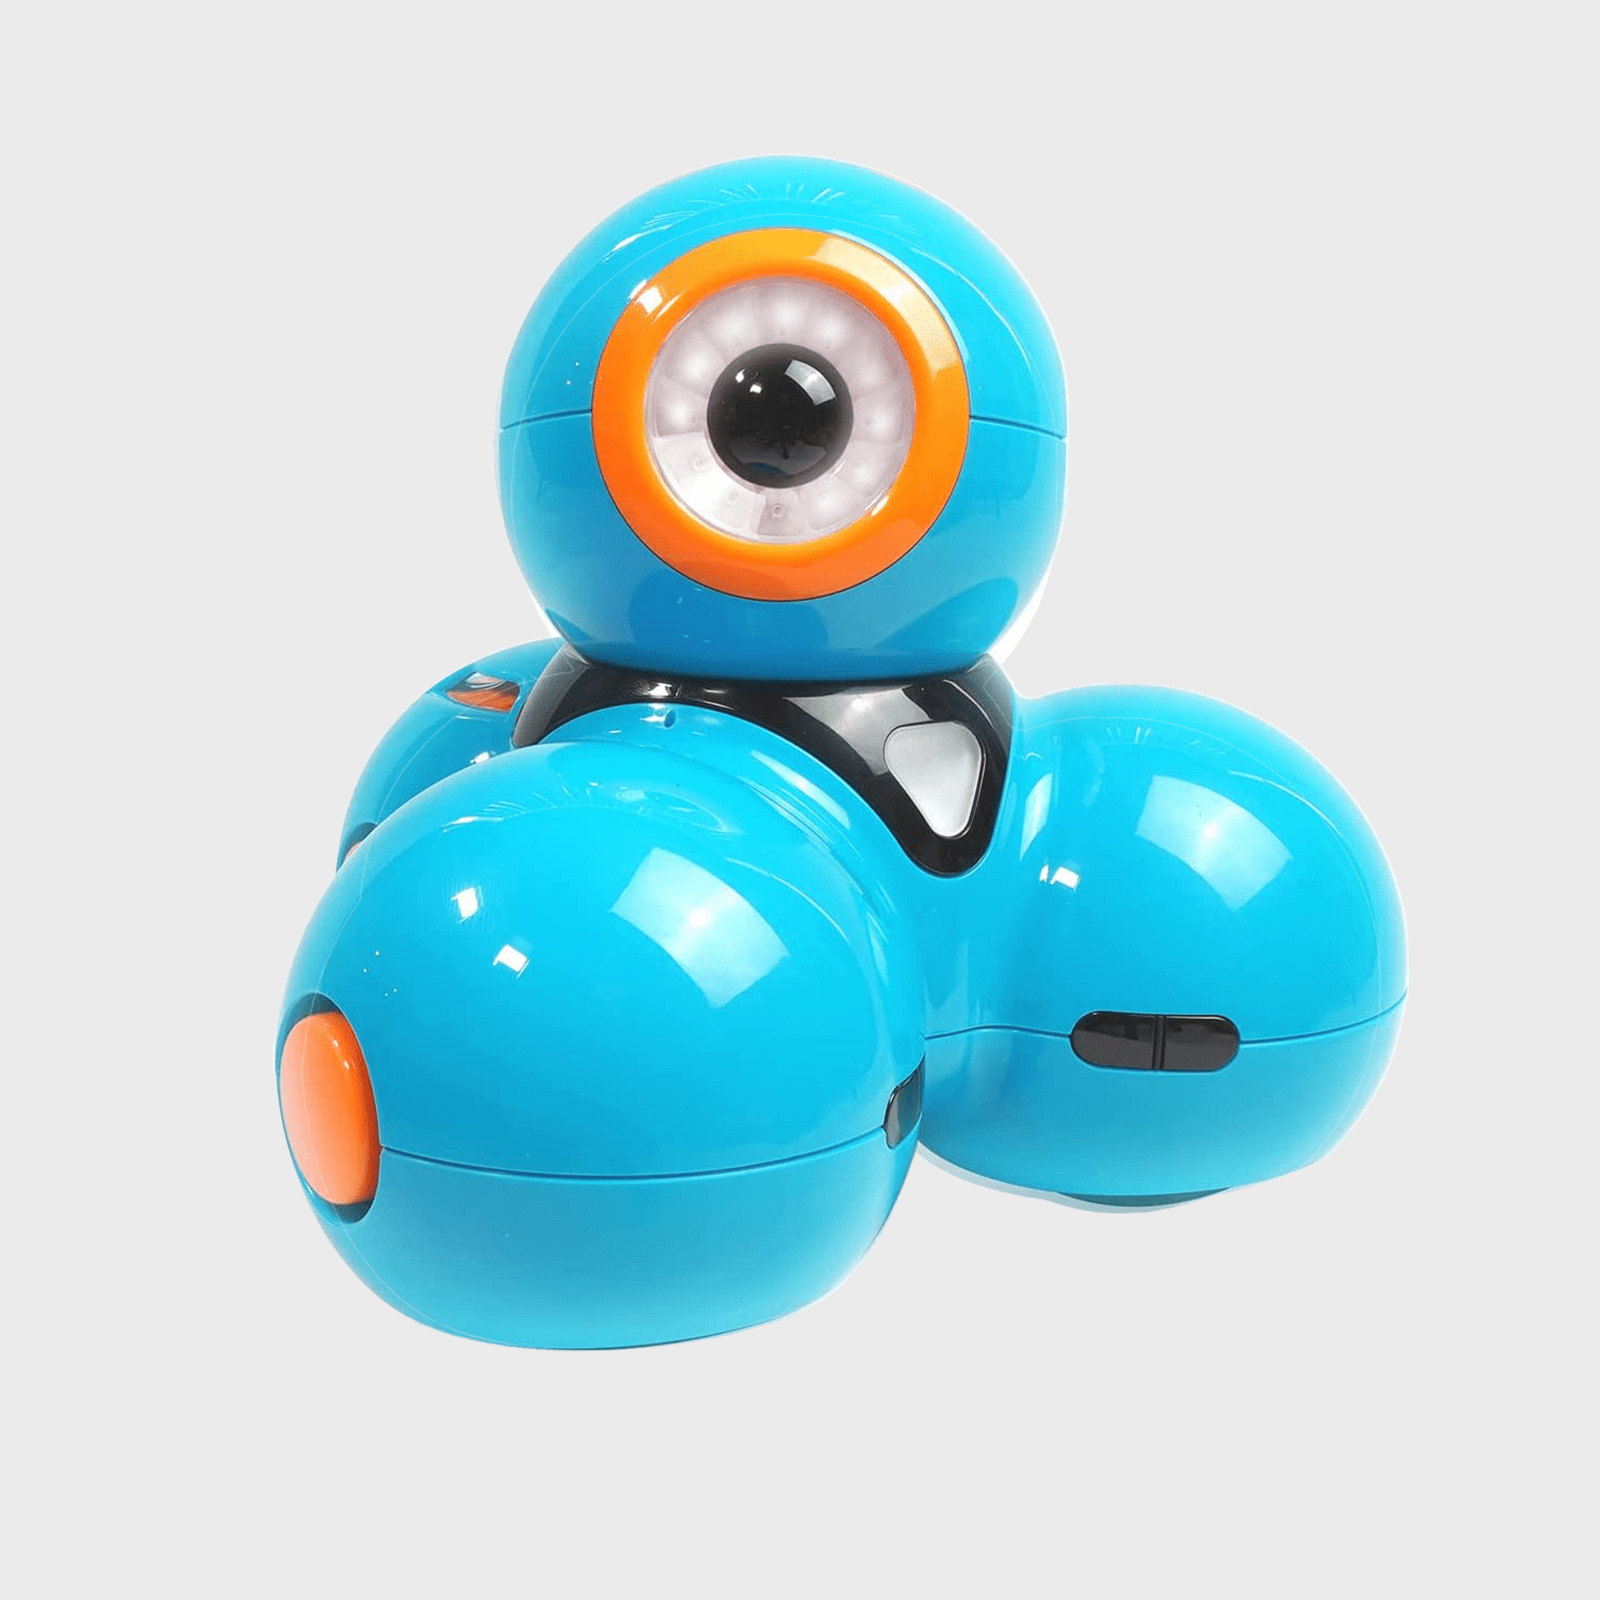 <p>Girls learn to code with this voice activated <a href="https://www.amazon.com/Wonder-Workshop-Dash-Activated-Programming/dp/B00SKURVKY/" rel="noopener noreferrer">coding robot</a>. They'll have fun making Dash move, dance, make sounds, avoid obstacles and knock down cup towers. Along with the physical robot, you'll also receive a 12-month subscription to Class Connect; a program that enhances how kids interact with Dash, and the Blockly App that powers it. Class Connect includes coding puzzles, 60 story-based, standards-aligned math activities and a virtual Dash robot kids can program in a rich 3-D environment on screen. Here are even more <a href="https://www.rd.com/list/tech-gifts/" rel="noopener noreferrer">cool tech gifts</a> for girls to consider.</p> <p class="listicle-page__cta-button-shop"><a class="shop-btn" href="https://www.amazon.com/Wonder-Workshop-Dash-Activated-Programming/dp/B00SKURVKY">Shop Now</a></p>